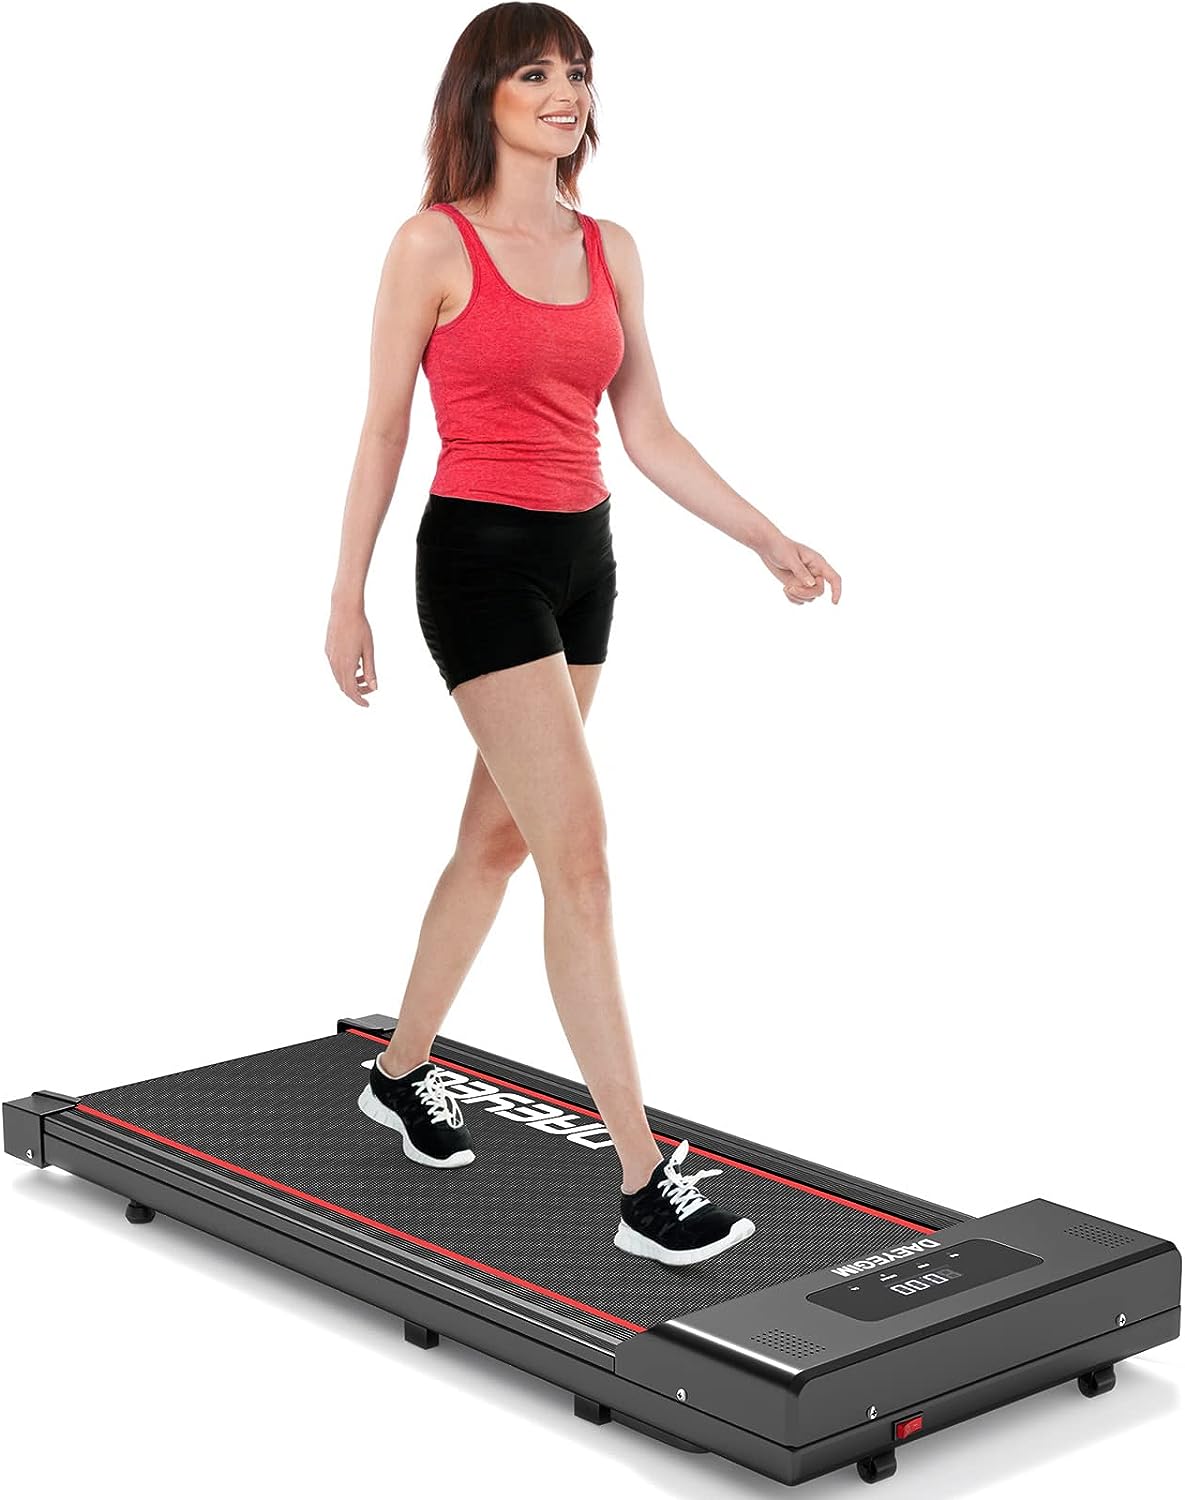 Walking Pad Under Desk Treadmill Walking Treadmill Portable Desk Treadmill Slim Walking Running for Home Office Exercise - Remote, LED Display